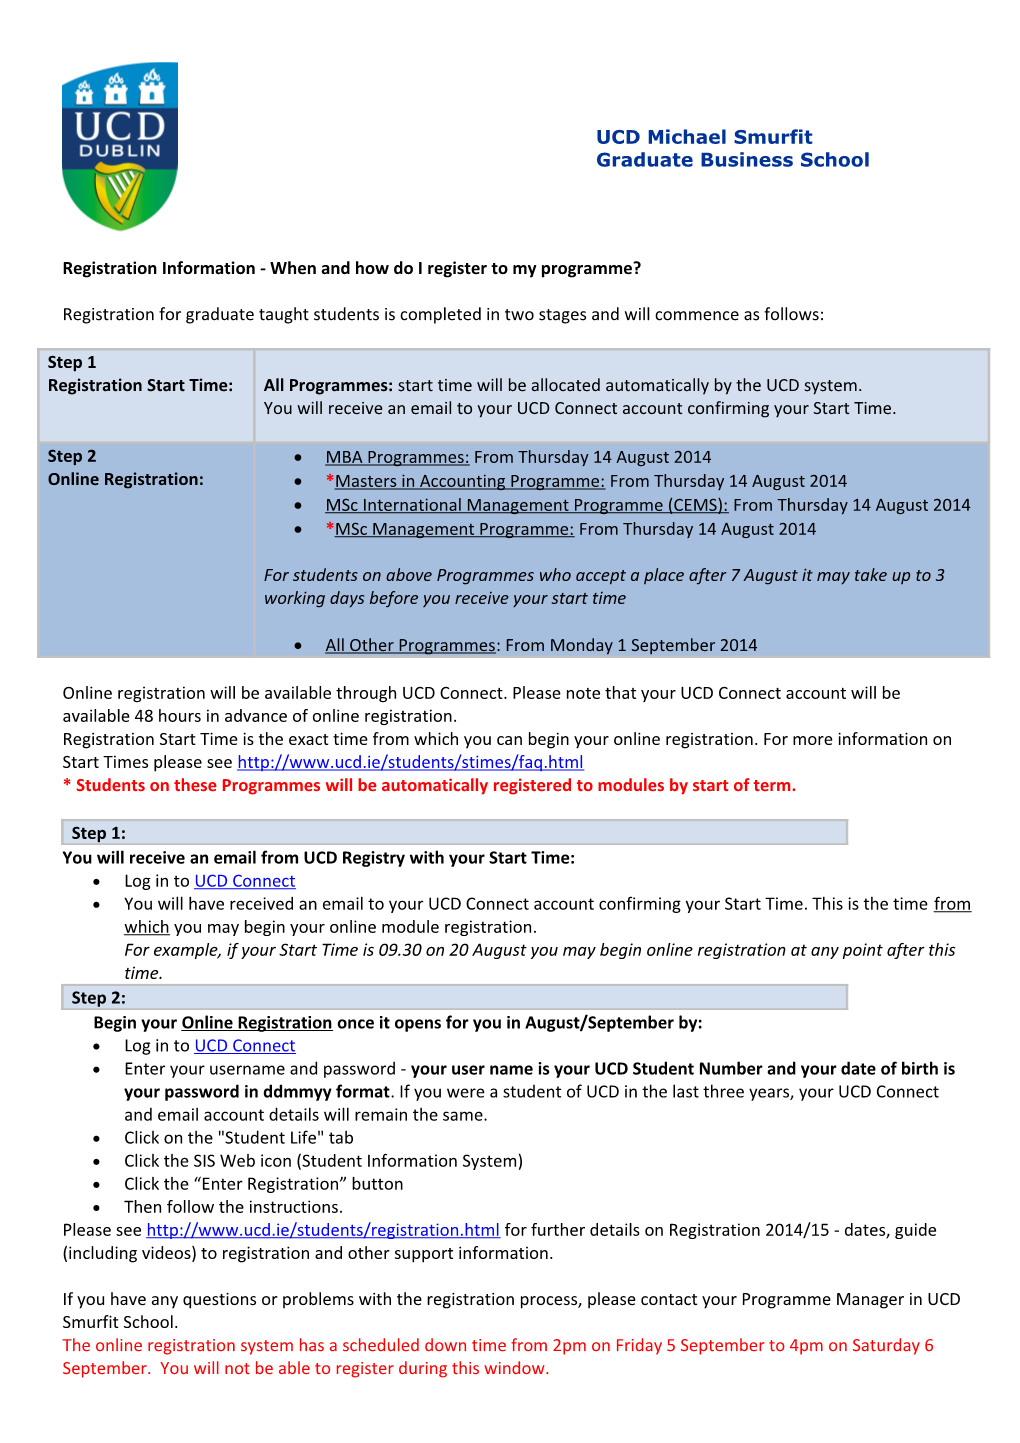 Registration Information - When and How Do I Register to My Programme?